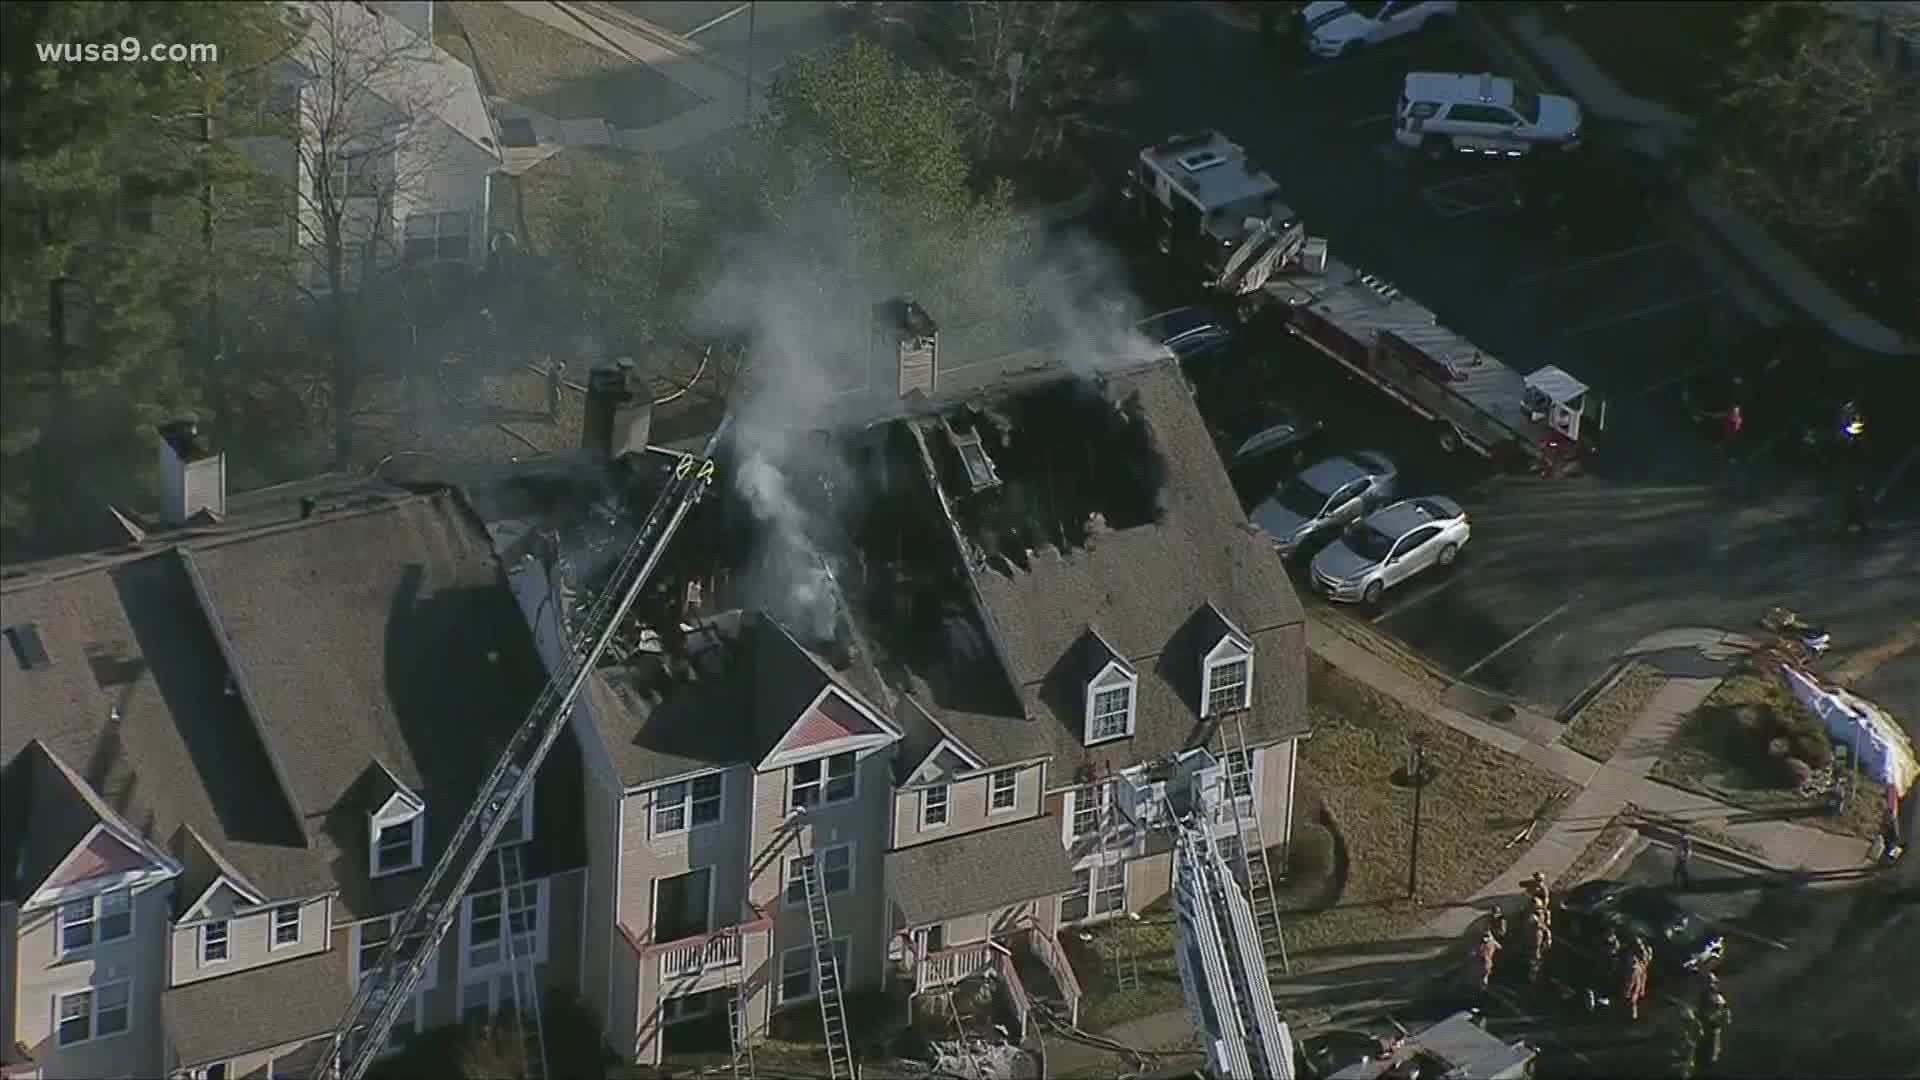 WUSA9 Sky9 is over a 2-alarm fire at townhouse in Laurel, Maryland.